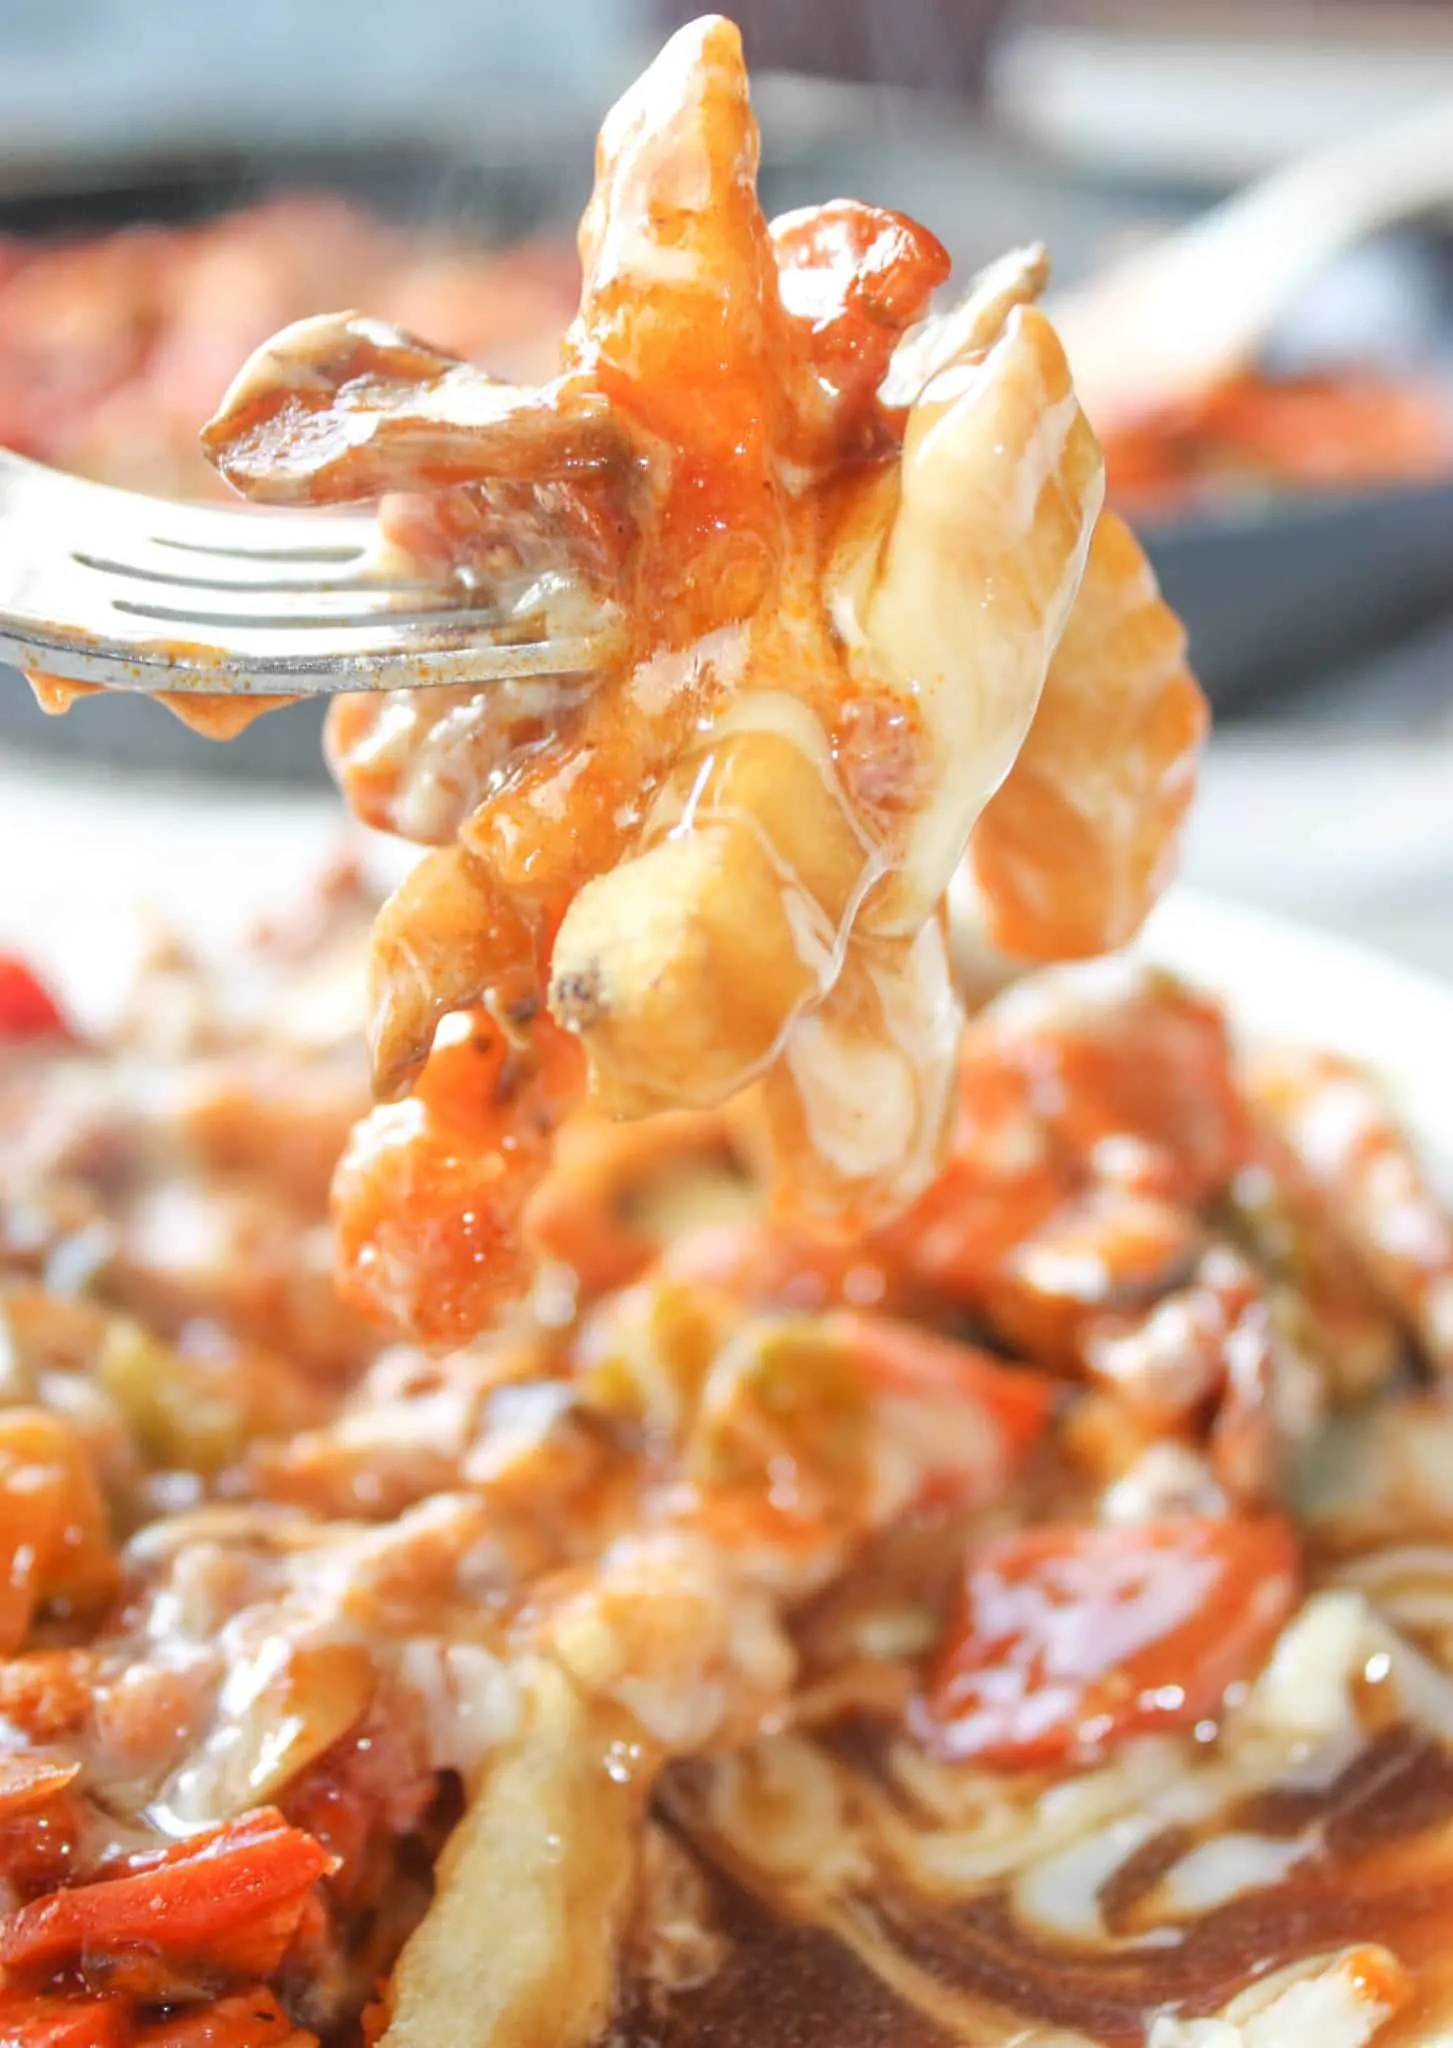 Loaded with pizza toppings, topped with shredded mozzarella and then smothered in gravy, Pizza Fries provide a tasty alternative to traditional Poutine.